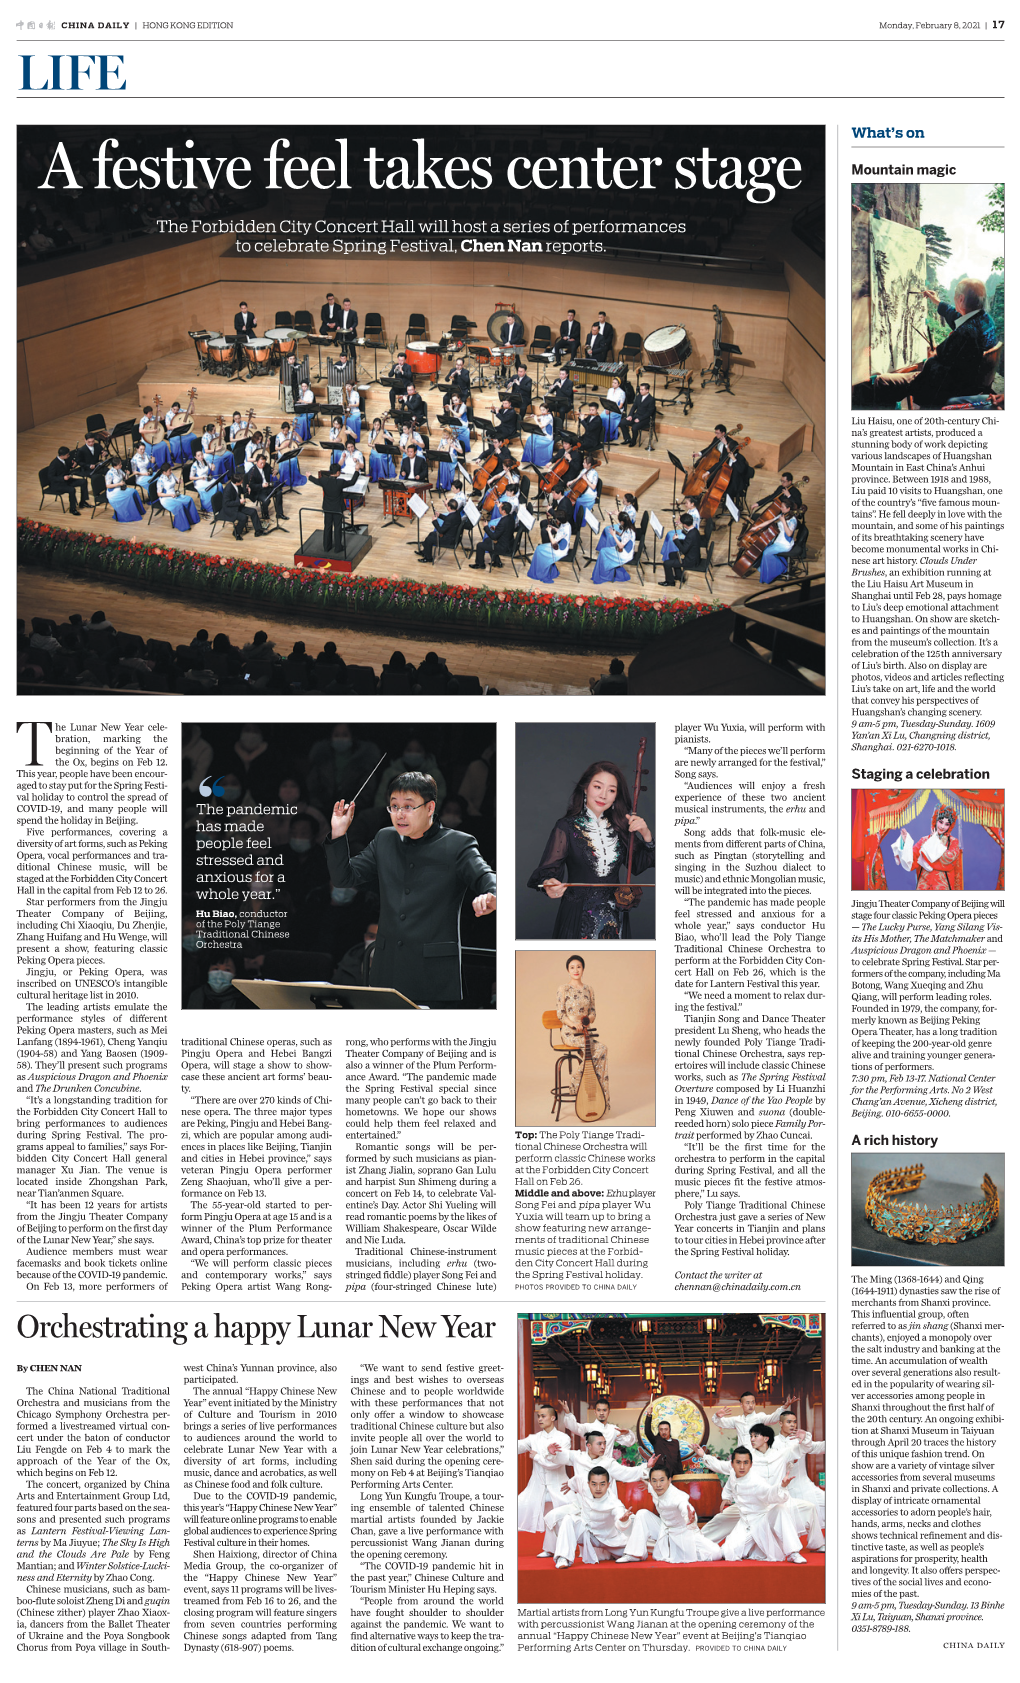 A Festive Feel Takes Center Stage Mountain Magic the Forbidden City Concert Hall Will Host a Series of Performances to Celebrate Spring Festival, Chen Nan Reports